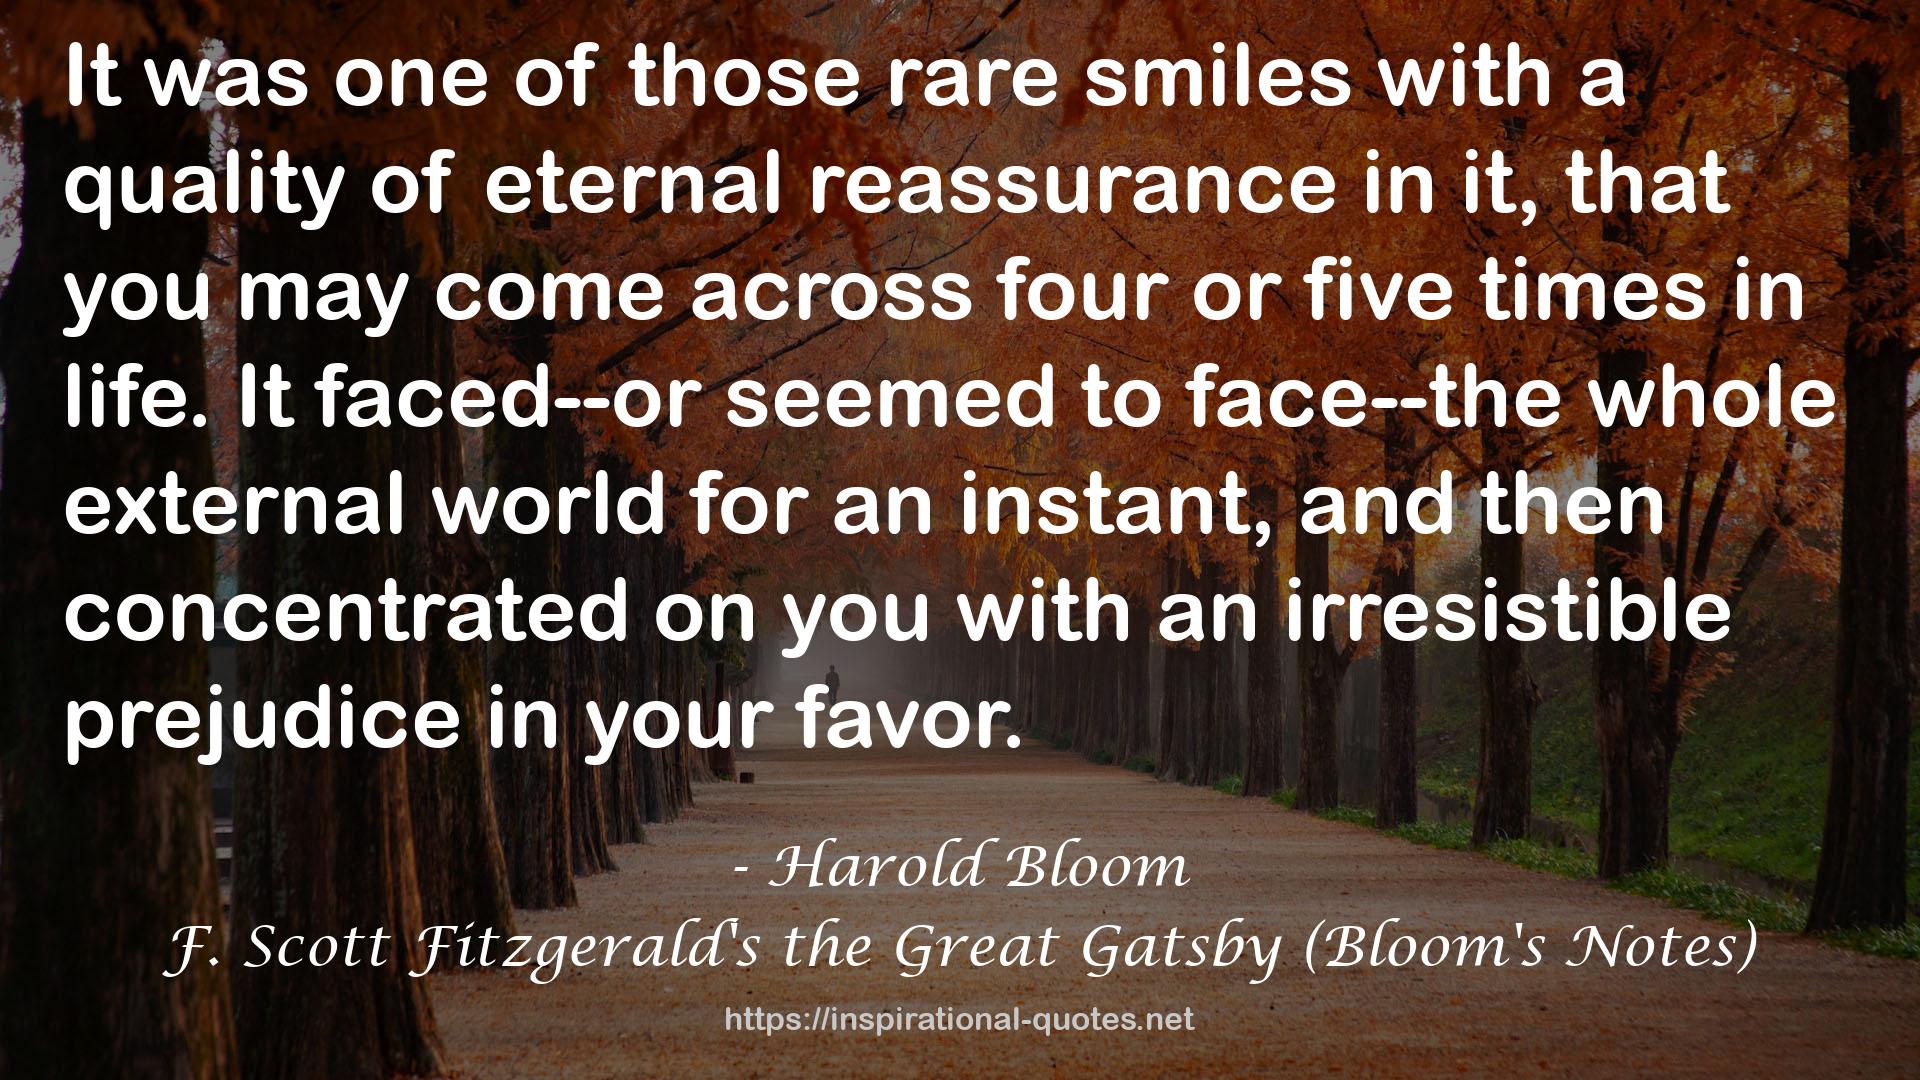 F. Scott Fitzgerald's the Great Gatsby (Bloom's Notes) QUOTES